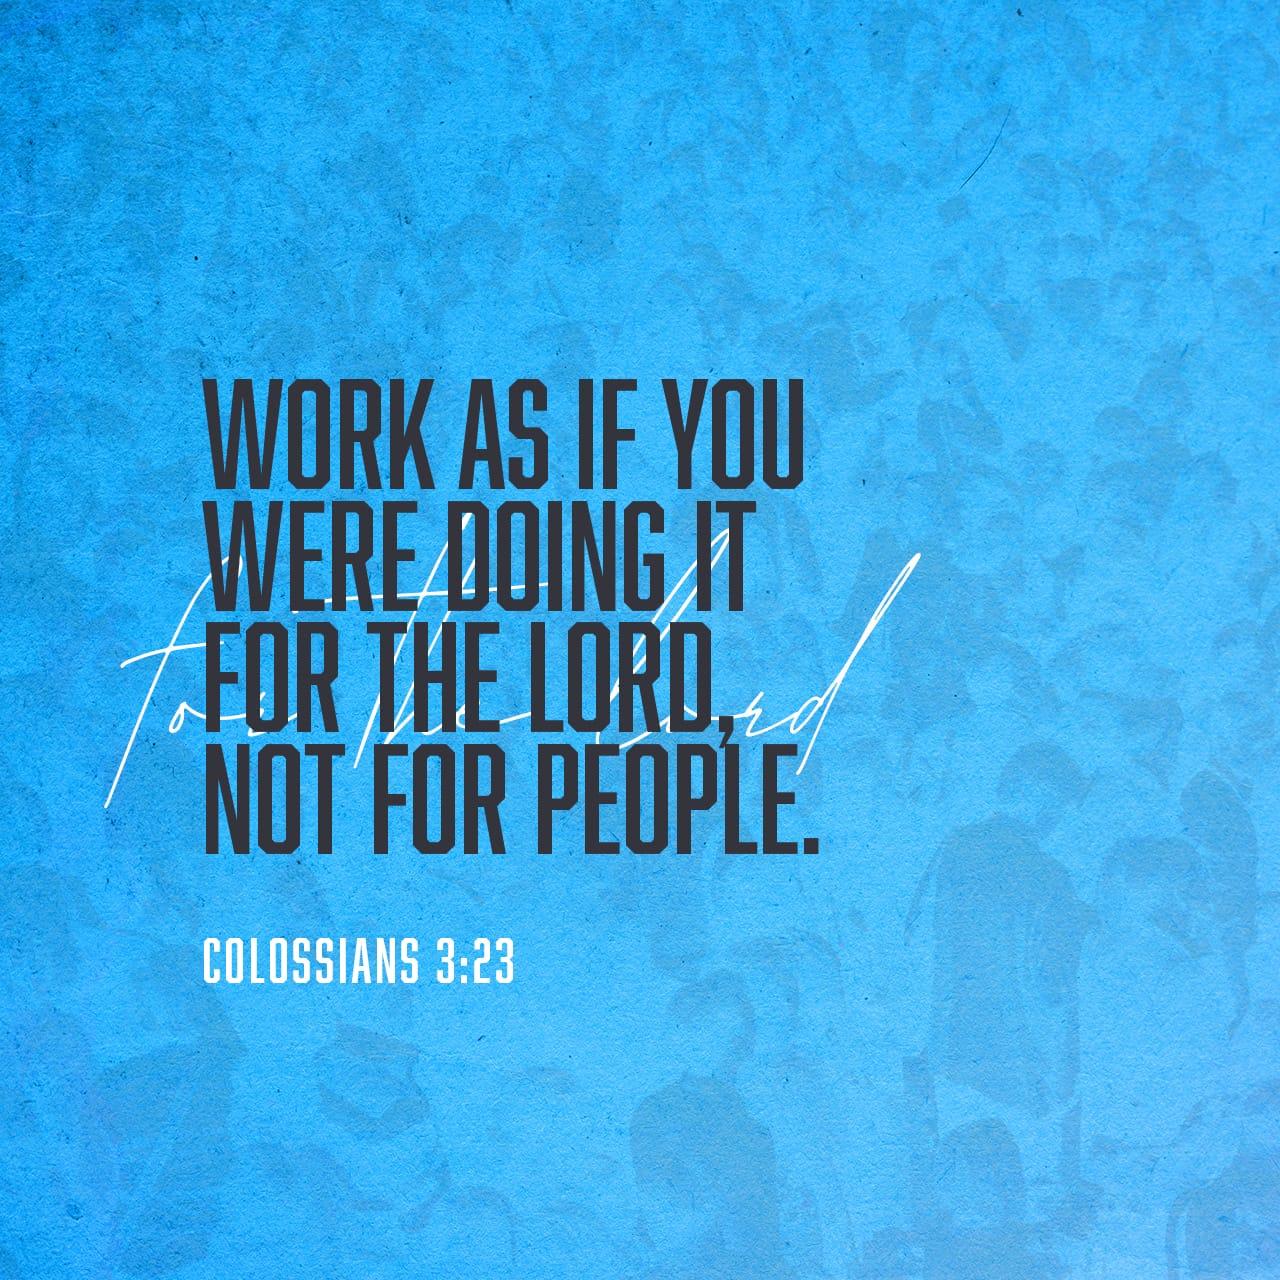 Bible Verse of the Day - day 156 - image 37584 (Colossians 3:23)